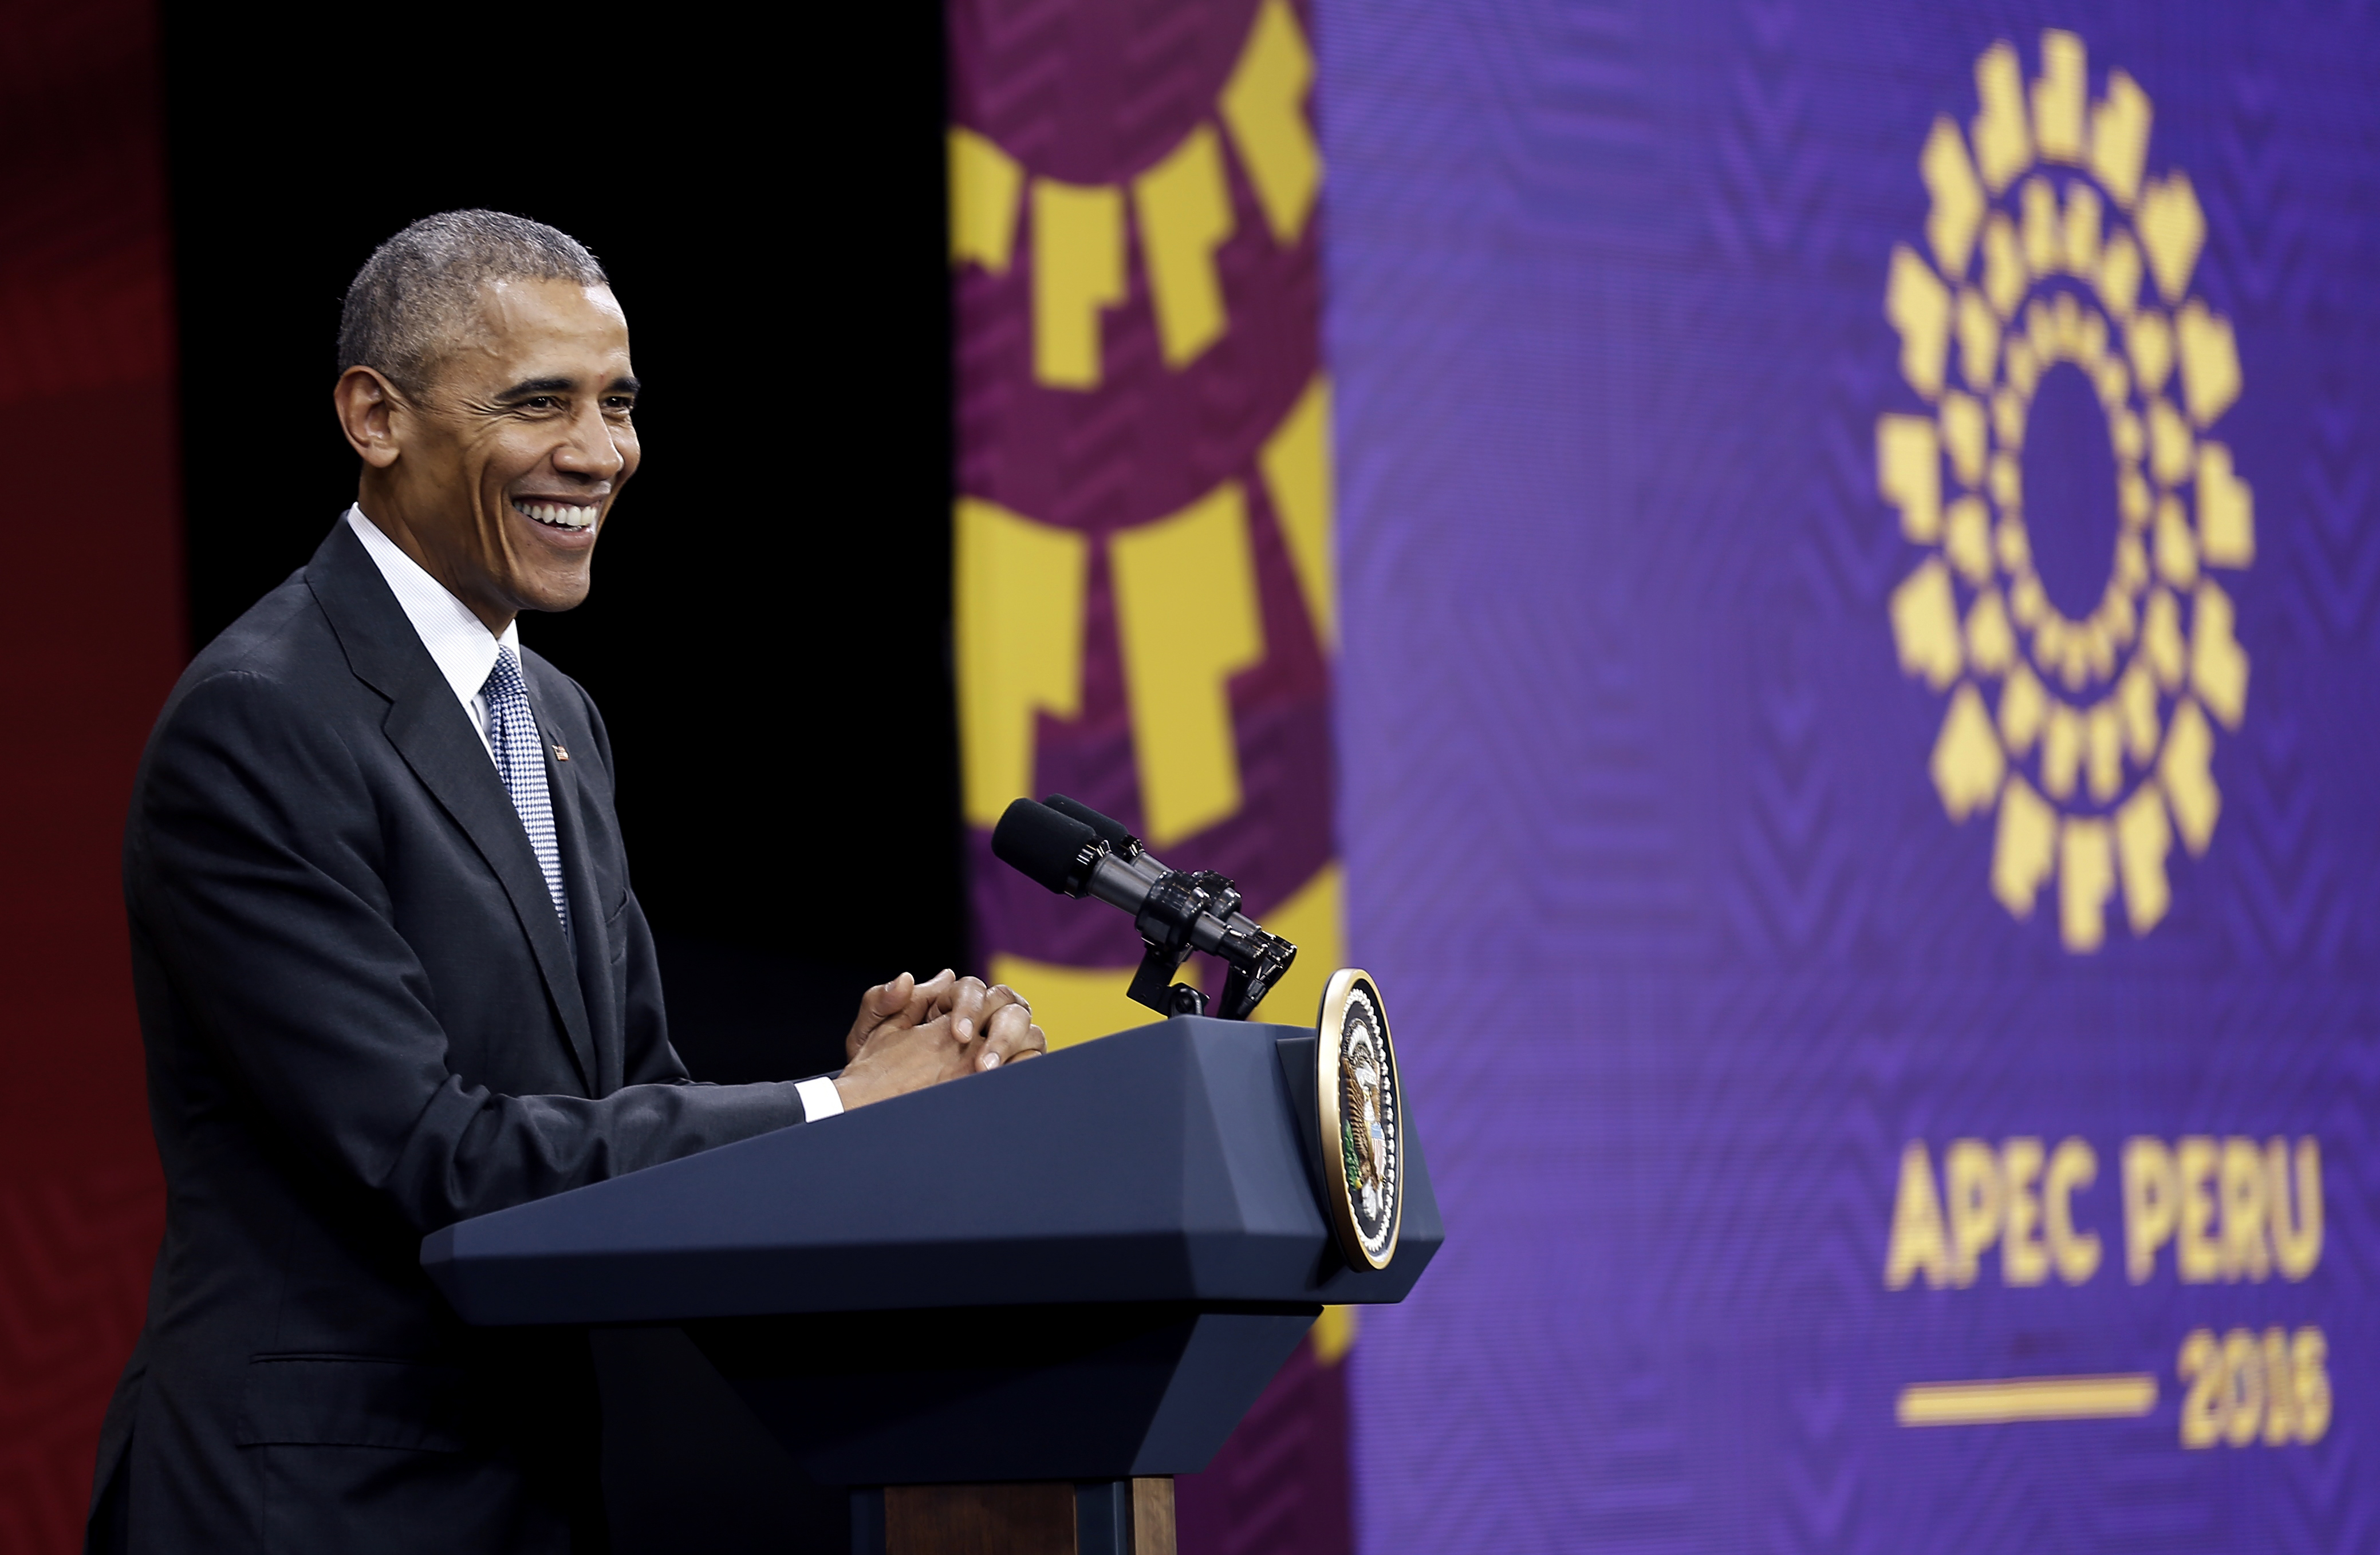 US President Barack Obama speaks during a press conference on the last day of the Asia-Pacific Economic Cooperation (APEC) Summit in Lima on November 20, 2016. Asia-Pacific leaders vowed on November 20 to fight protectionism at the close of a summit upended by US President-elect Donald Trump's shock victory and virulent attacks on free-trade deals. / AFP PHOTO / LUKA GONZALES